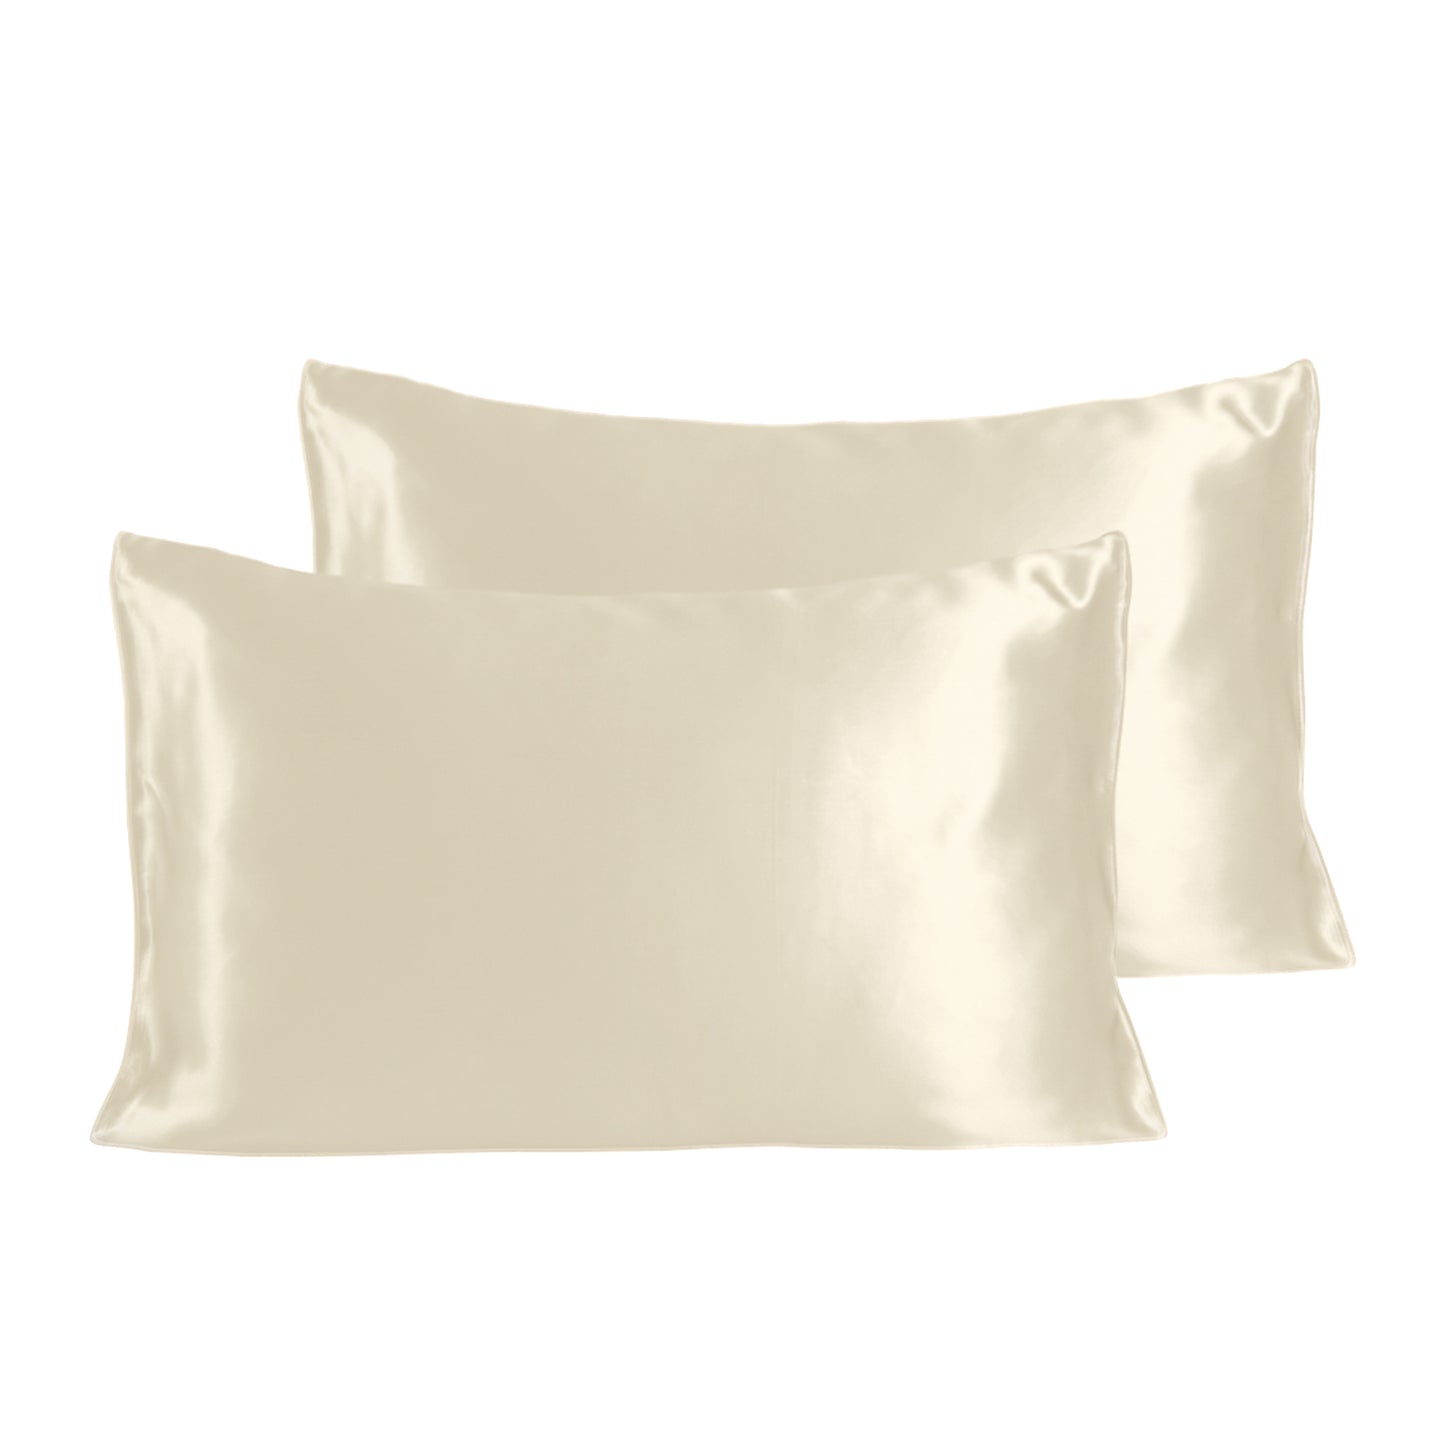 Charming Ivory Sateen Pillow cover set